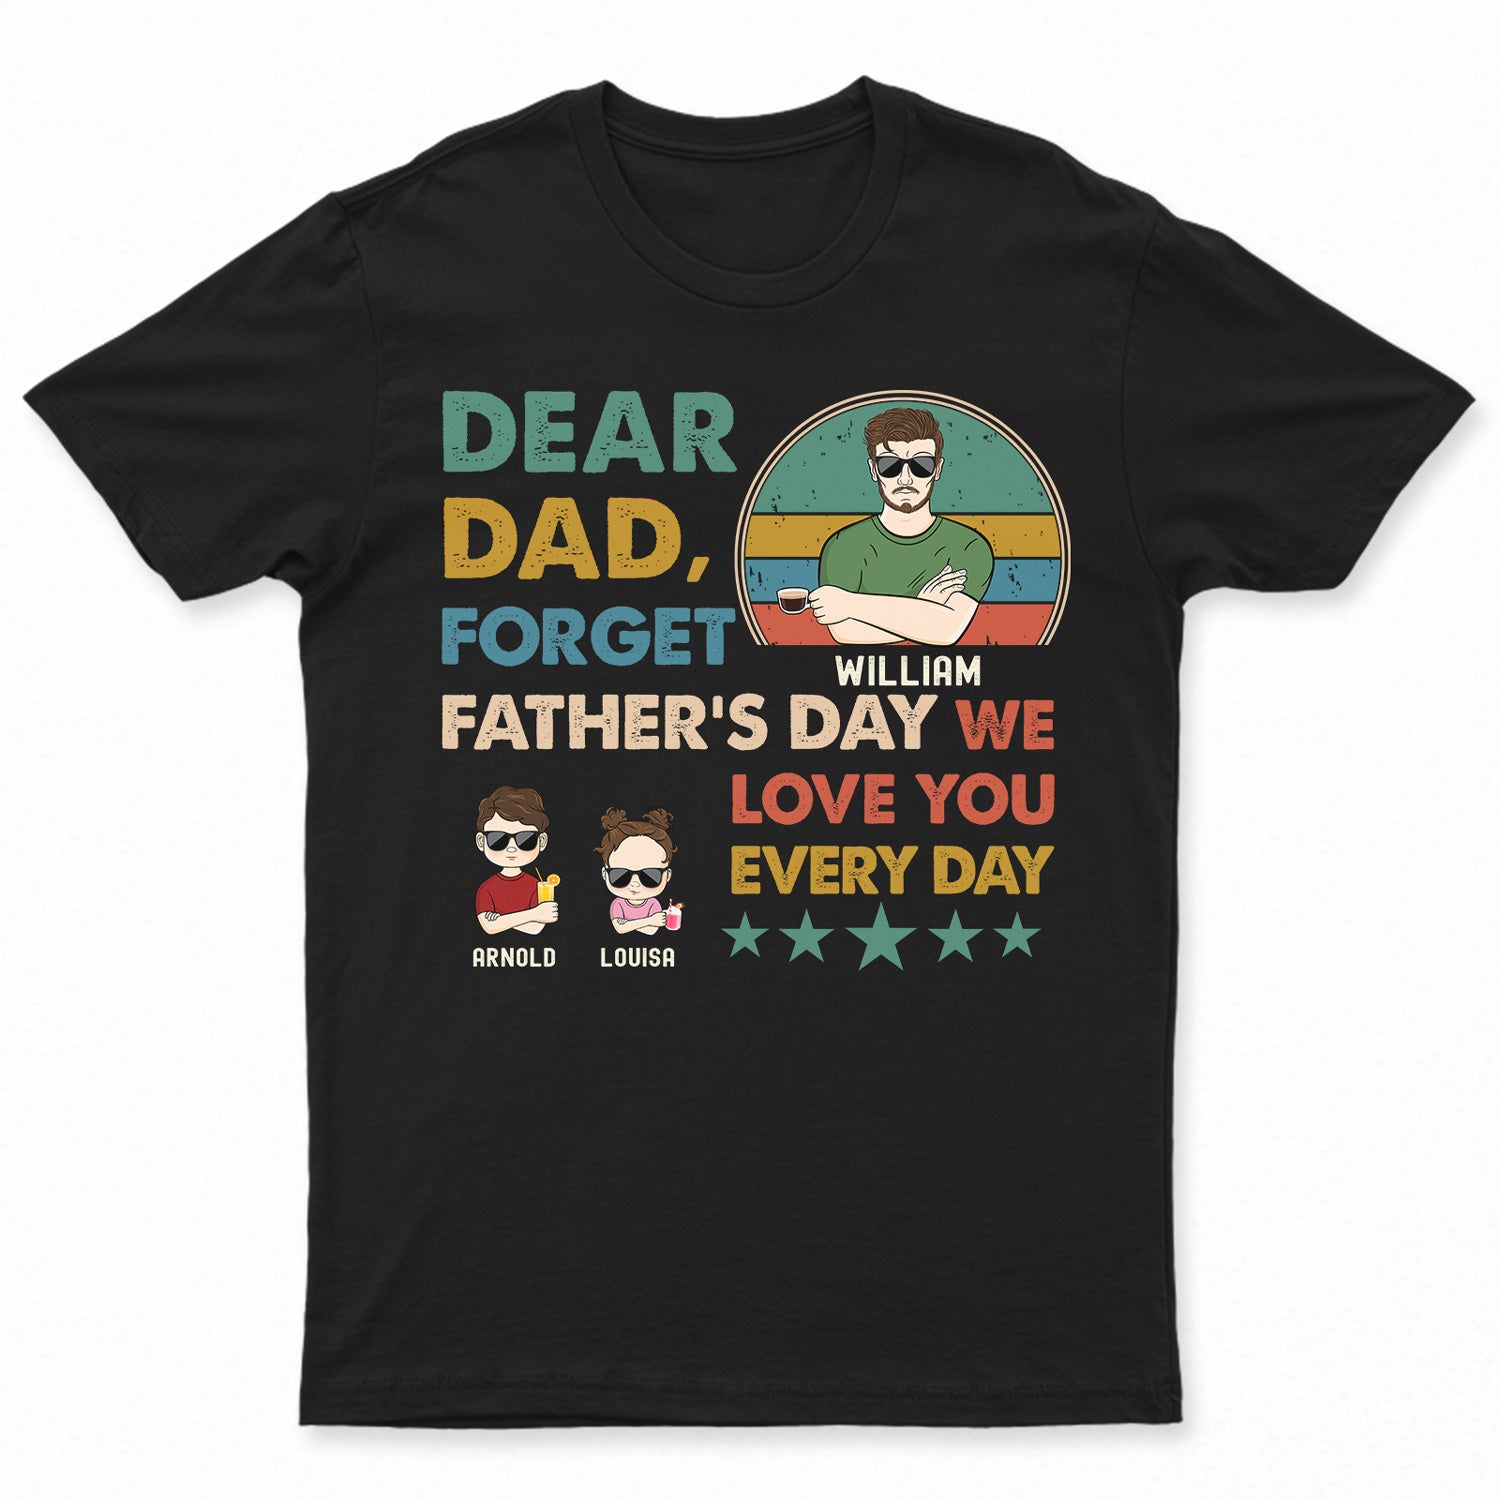 Dear Dad We Love You Every Day - Birthday, Loving Gift For Father, Grandpa, Grandfather - Personalized Custom T Shirt